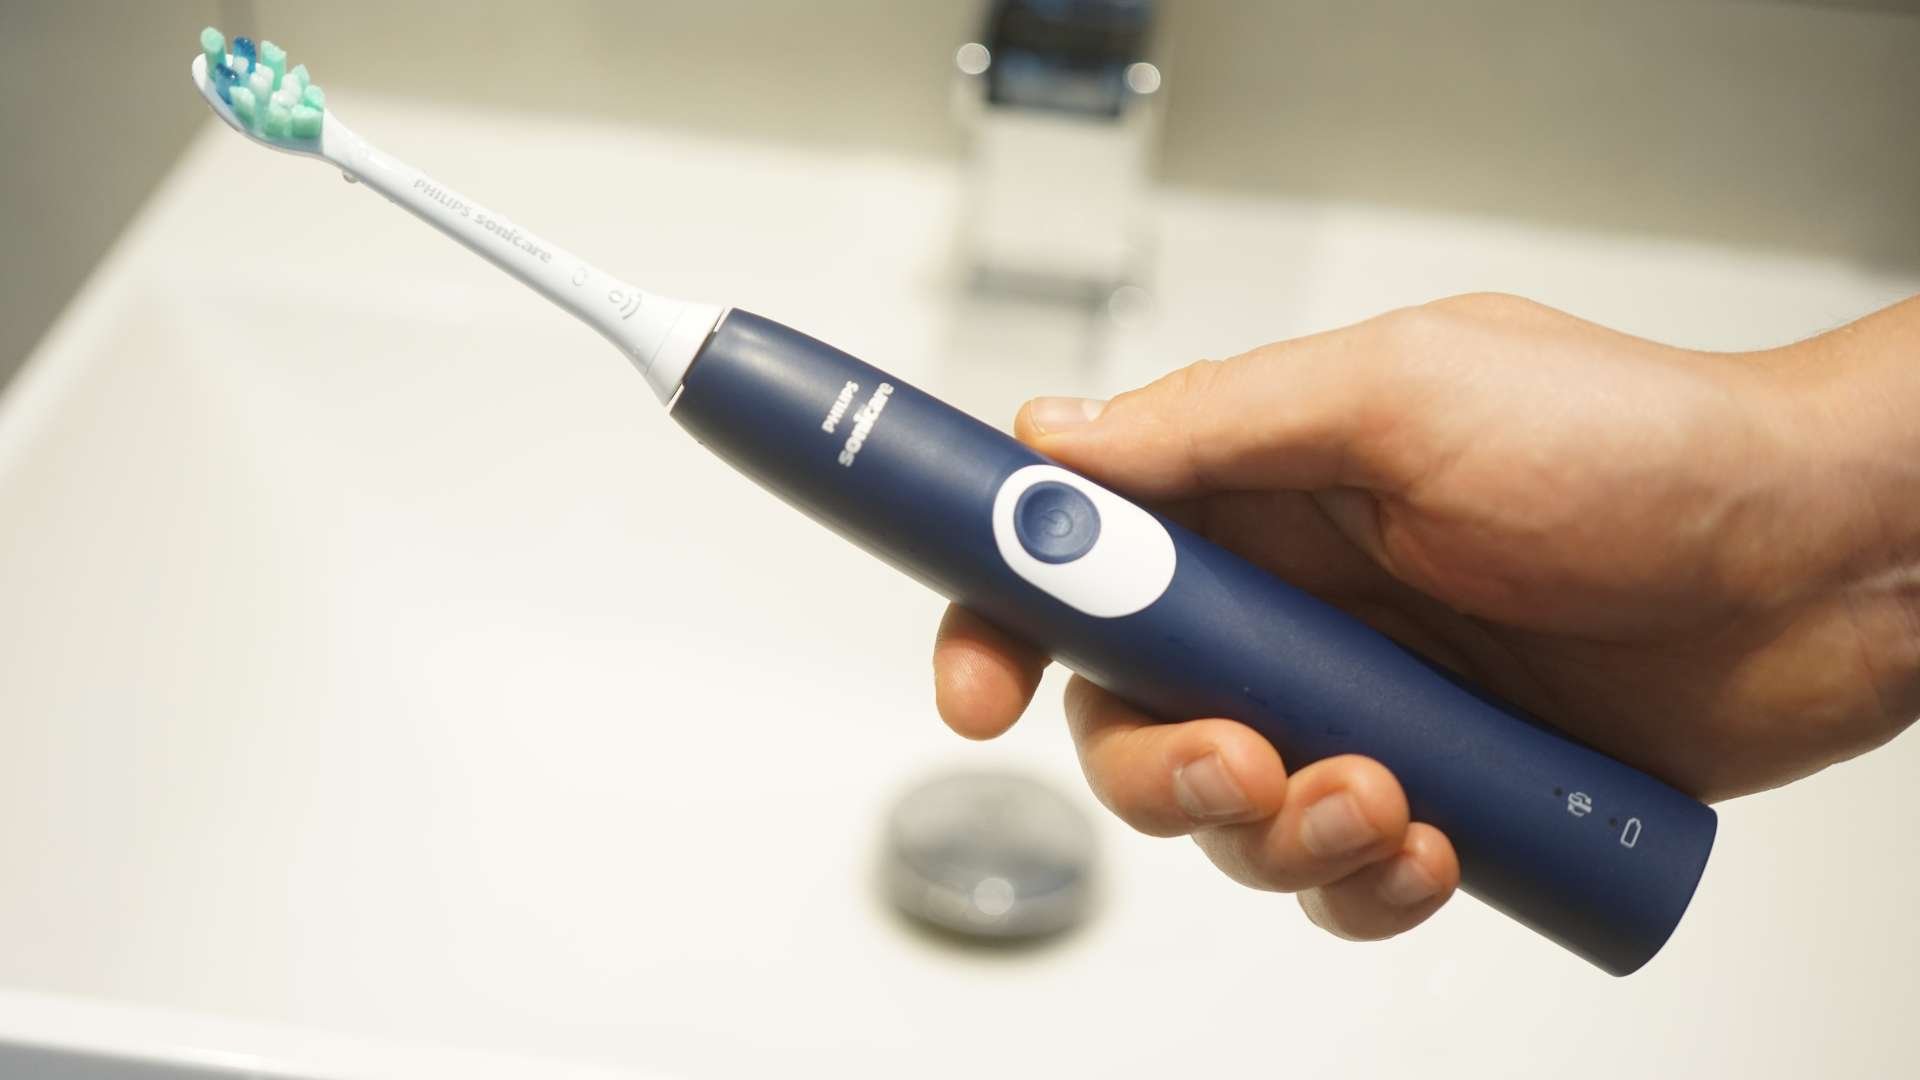 Sonicare 4300 in hand during testing